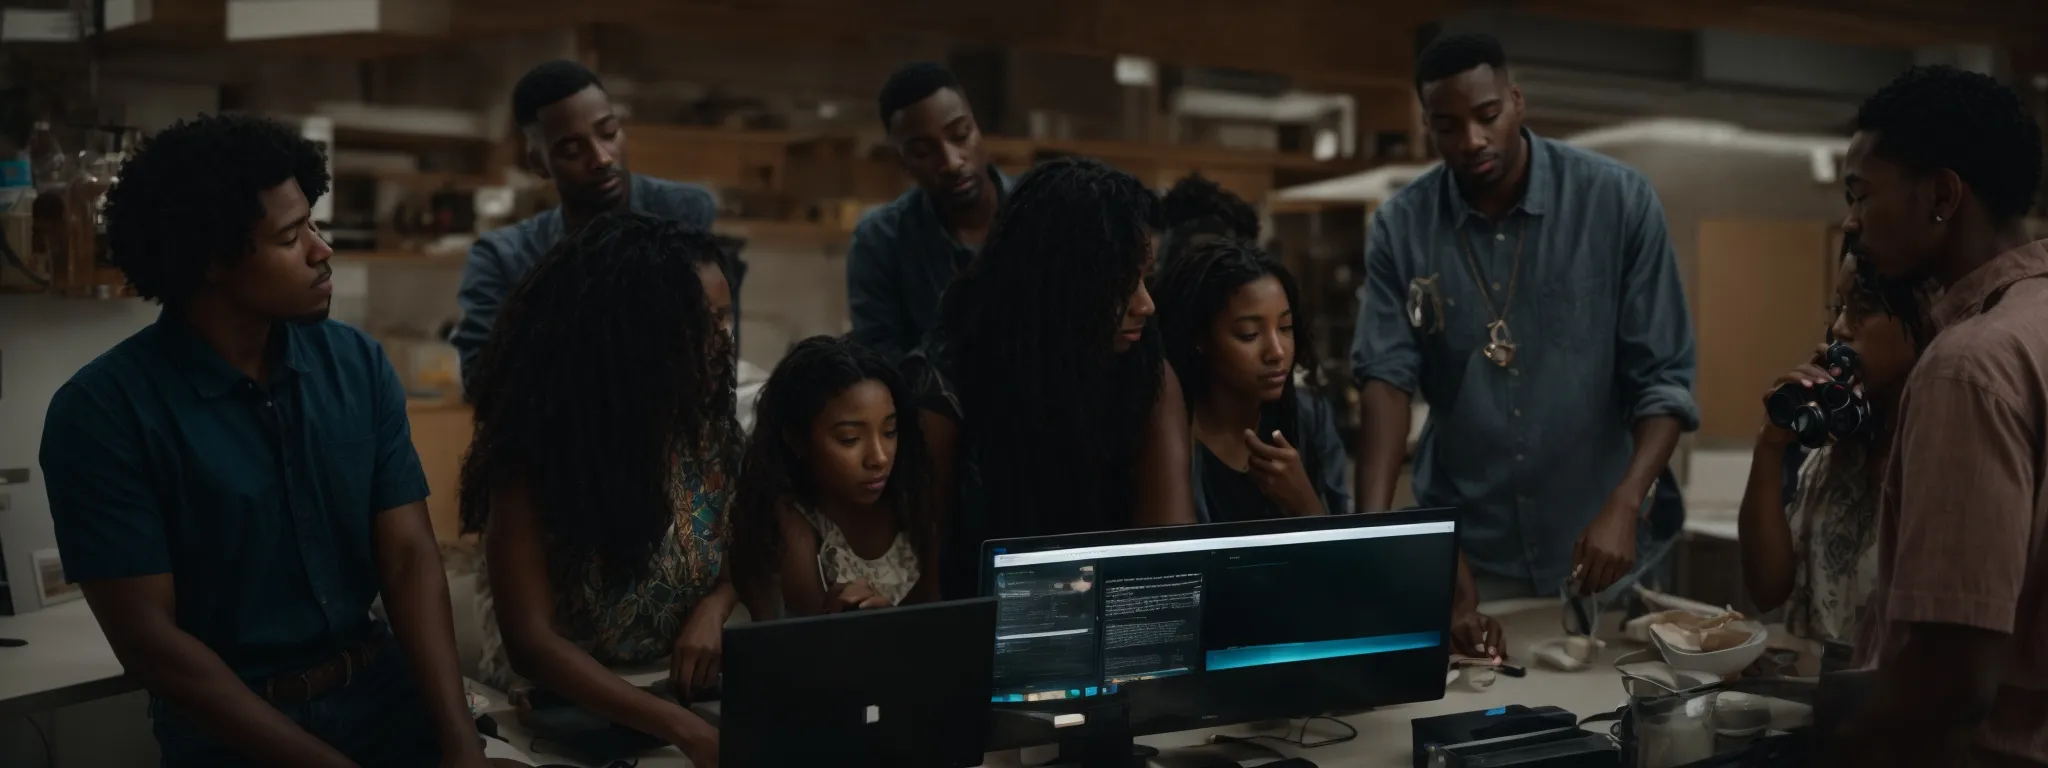 a diverse group of people gathered around a computer, engaging in a collaborative discussion.